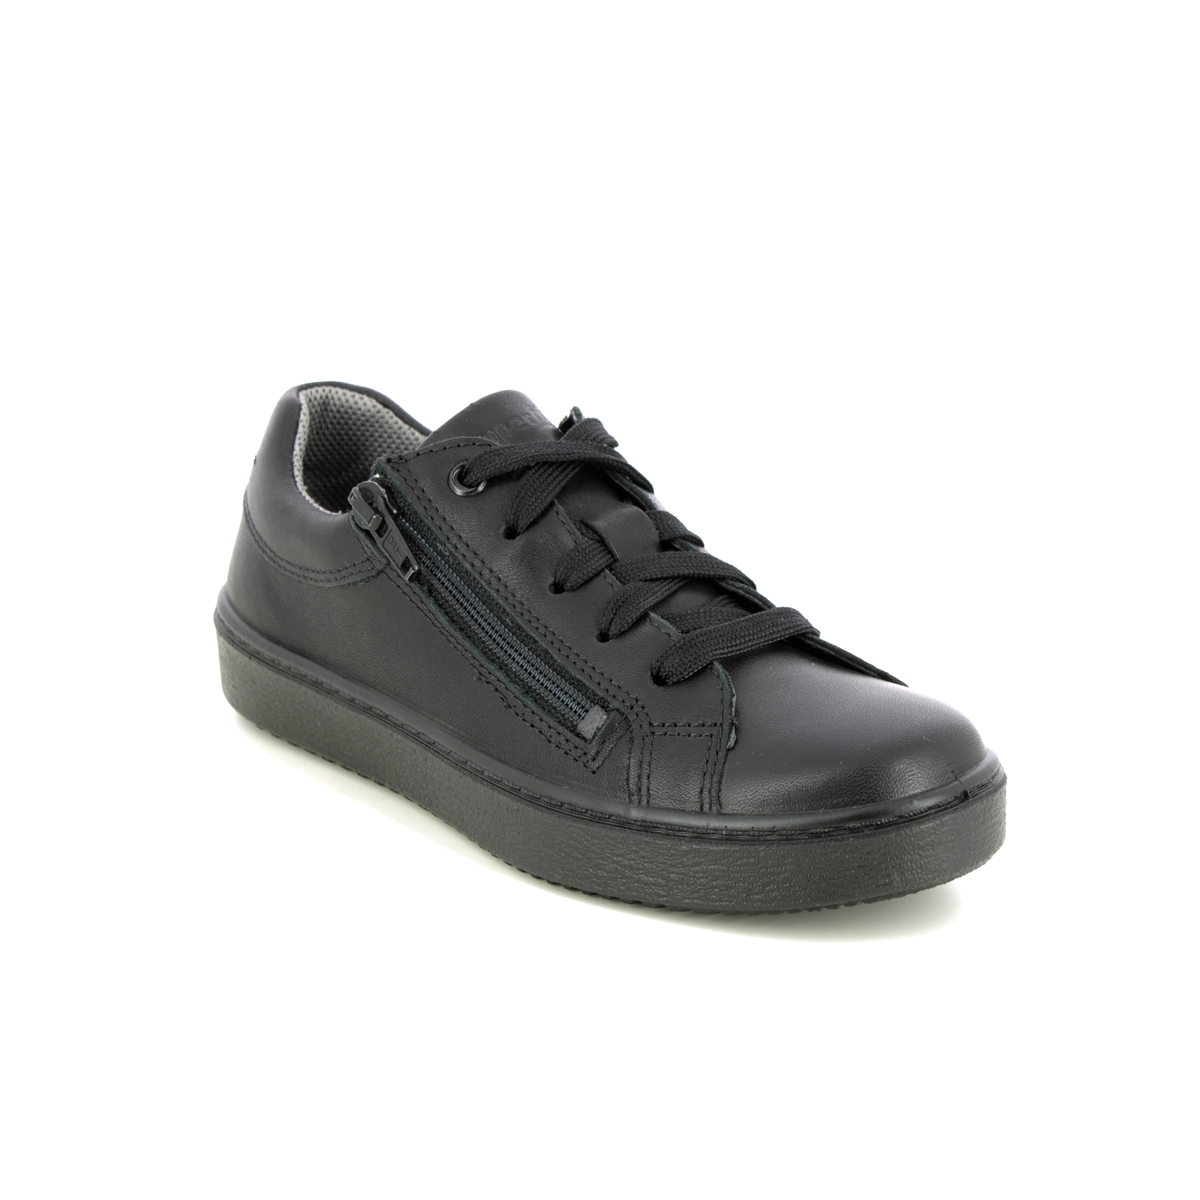 Superfit Heaven Zip Lace Black Leather Kids Girls Shoes 1006489-0000 In Size 35 In Plain Black Leather For kids